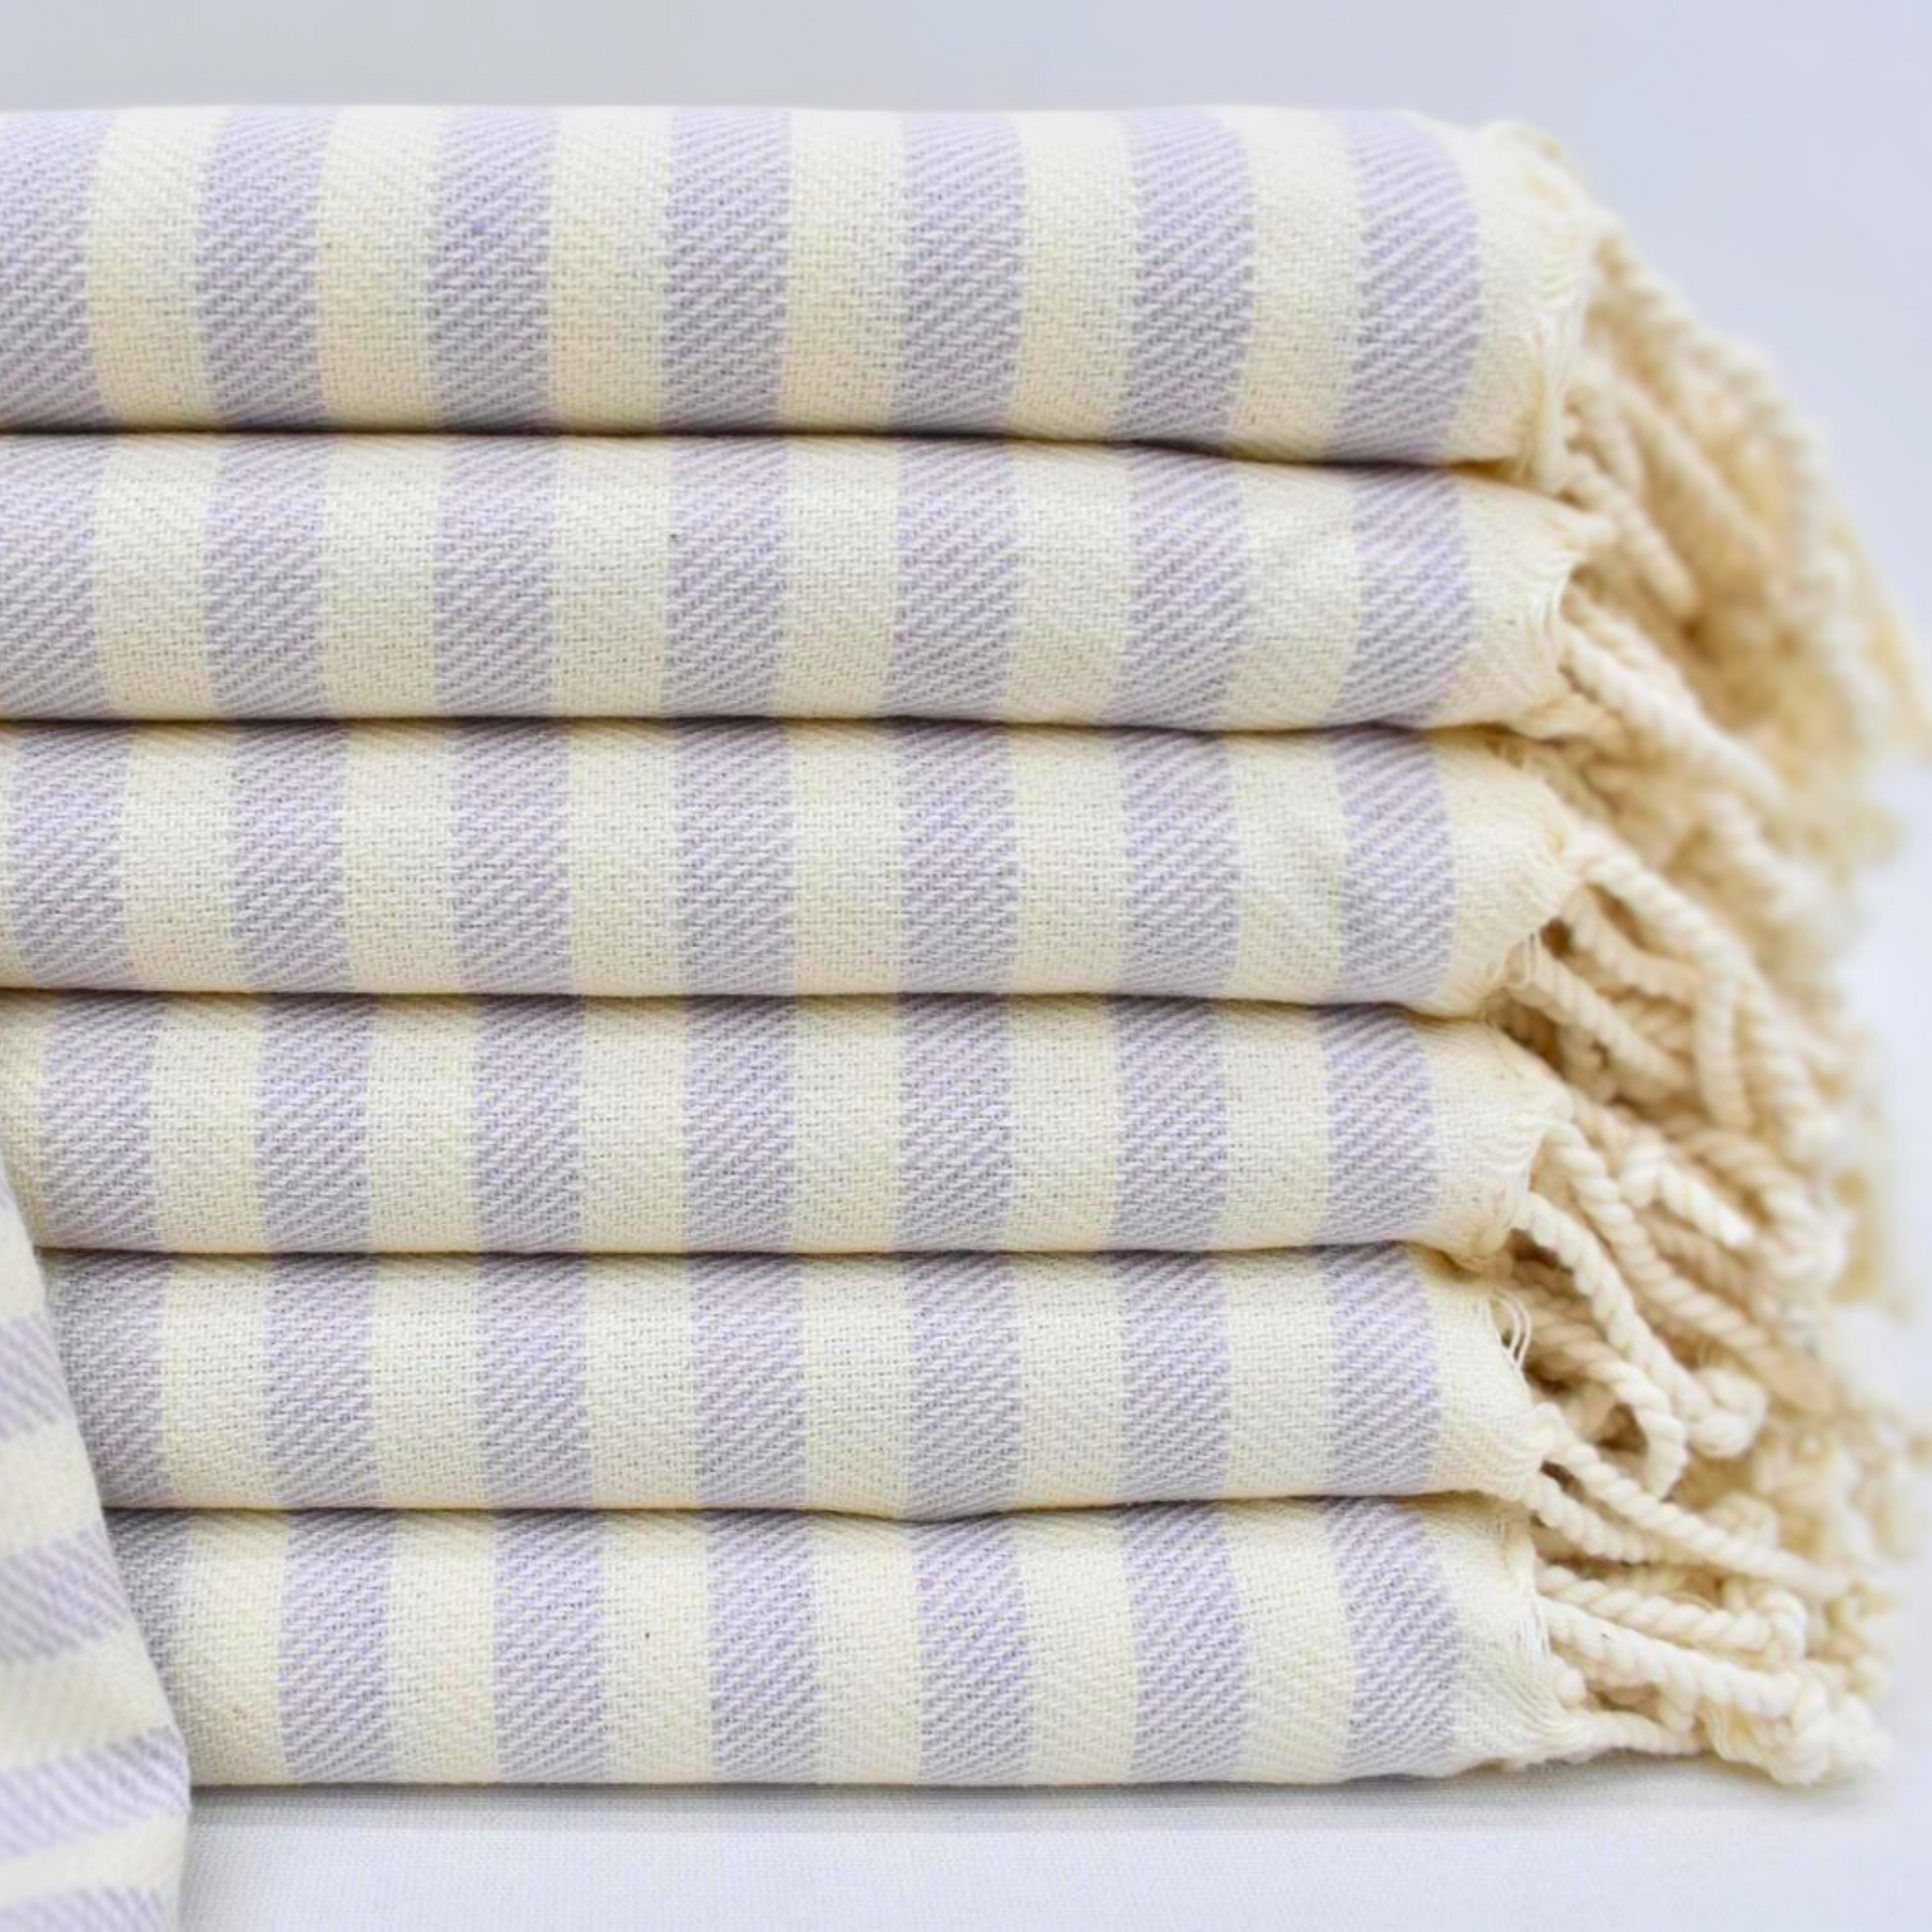 Stack of folded LAVENDER Turkish Towels with soft lavender colour stripes and natural colour hand-knotted fringes